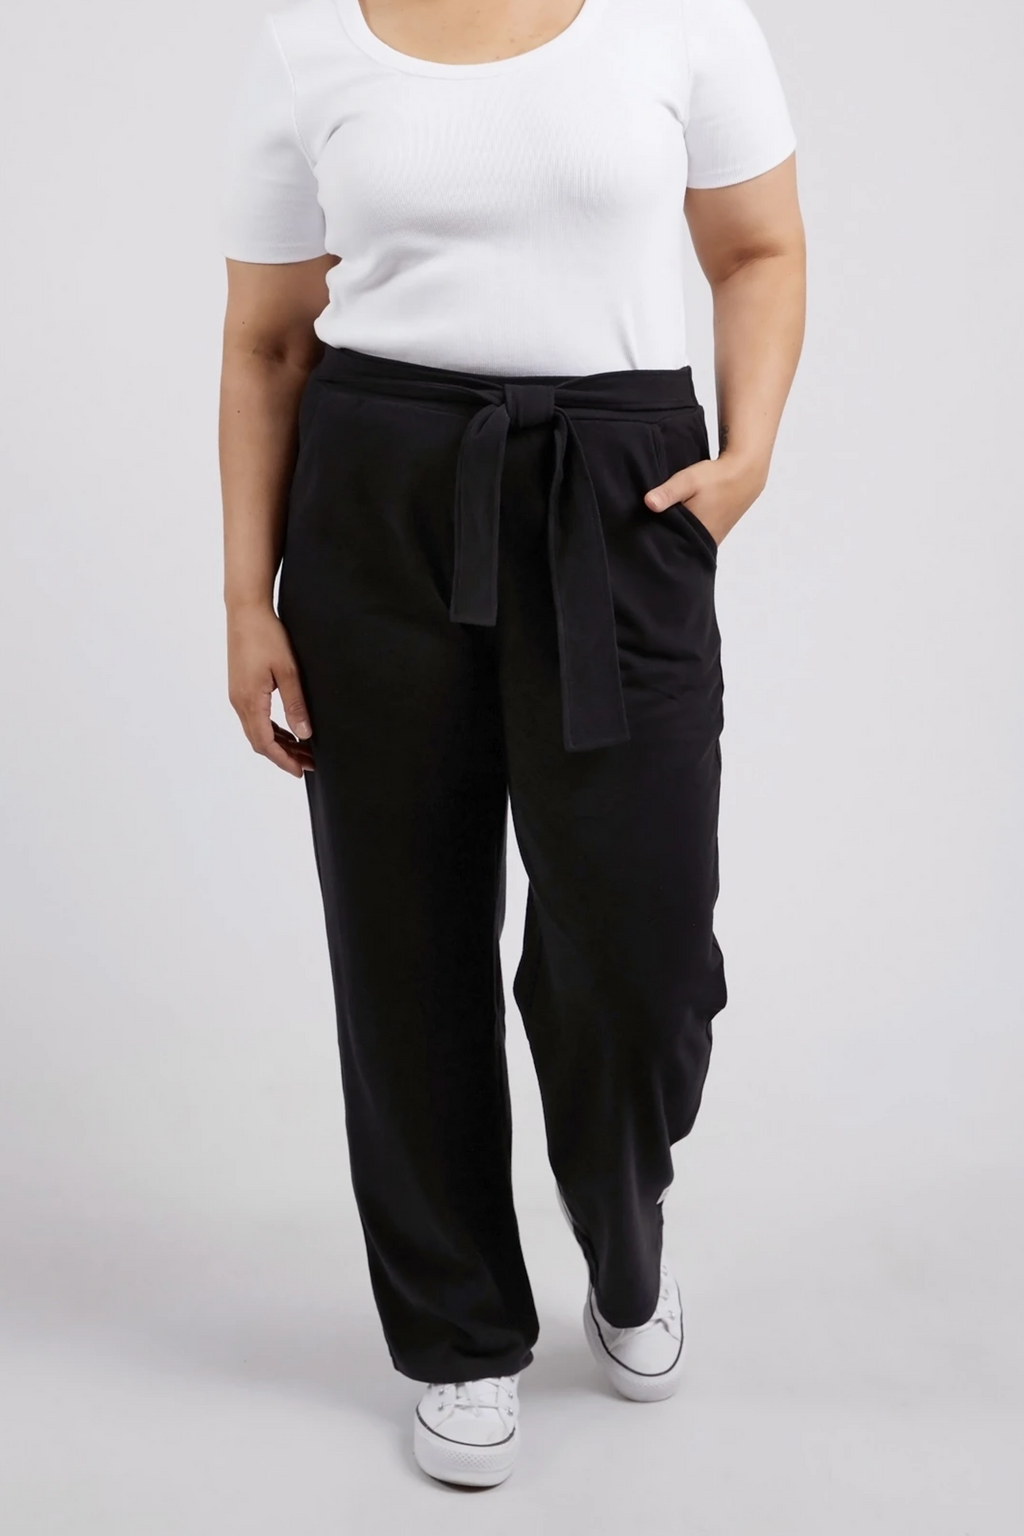 ON THE GO PANT - Black